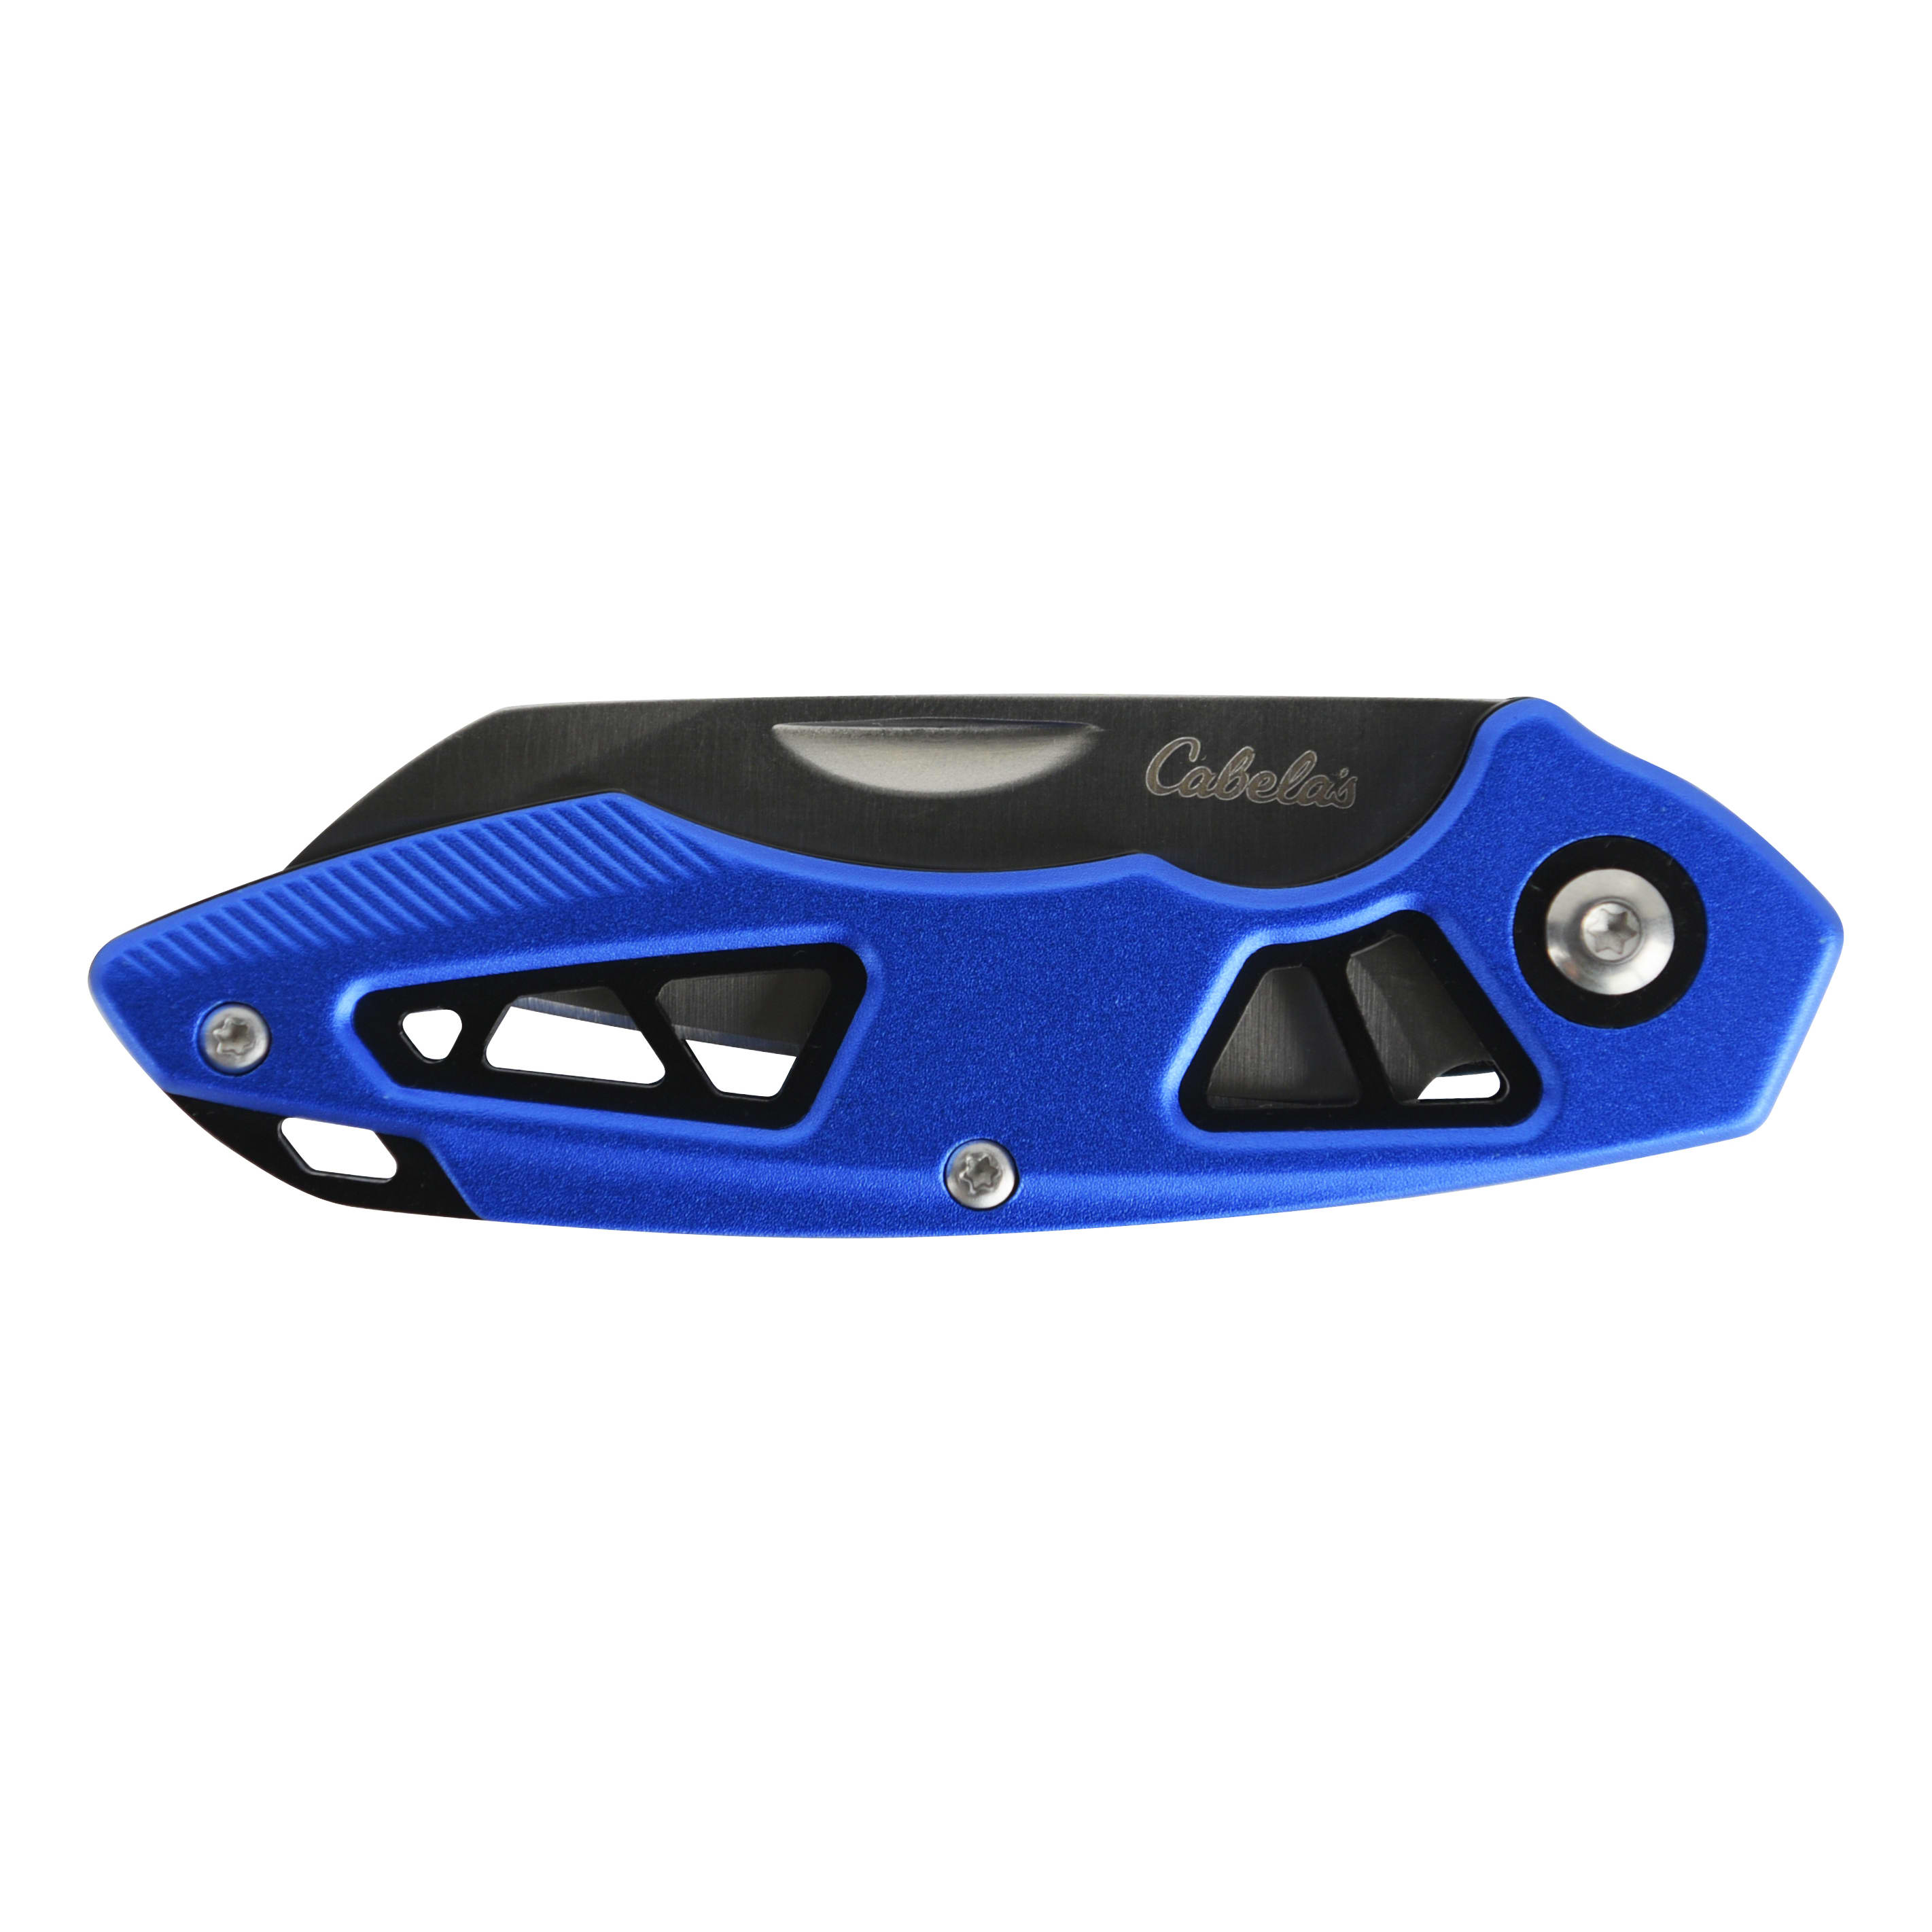 Cabela's Knife and Flashlight Combo with Waterproof Case - Blue - Knife - Closed View